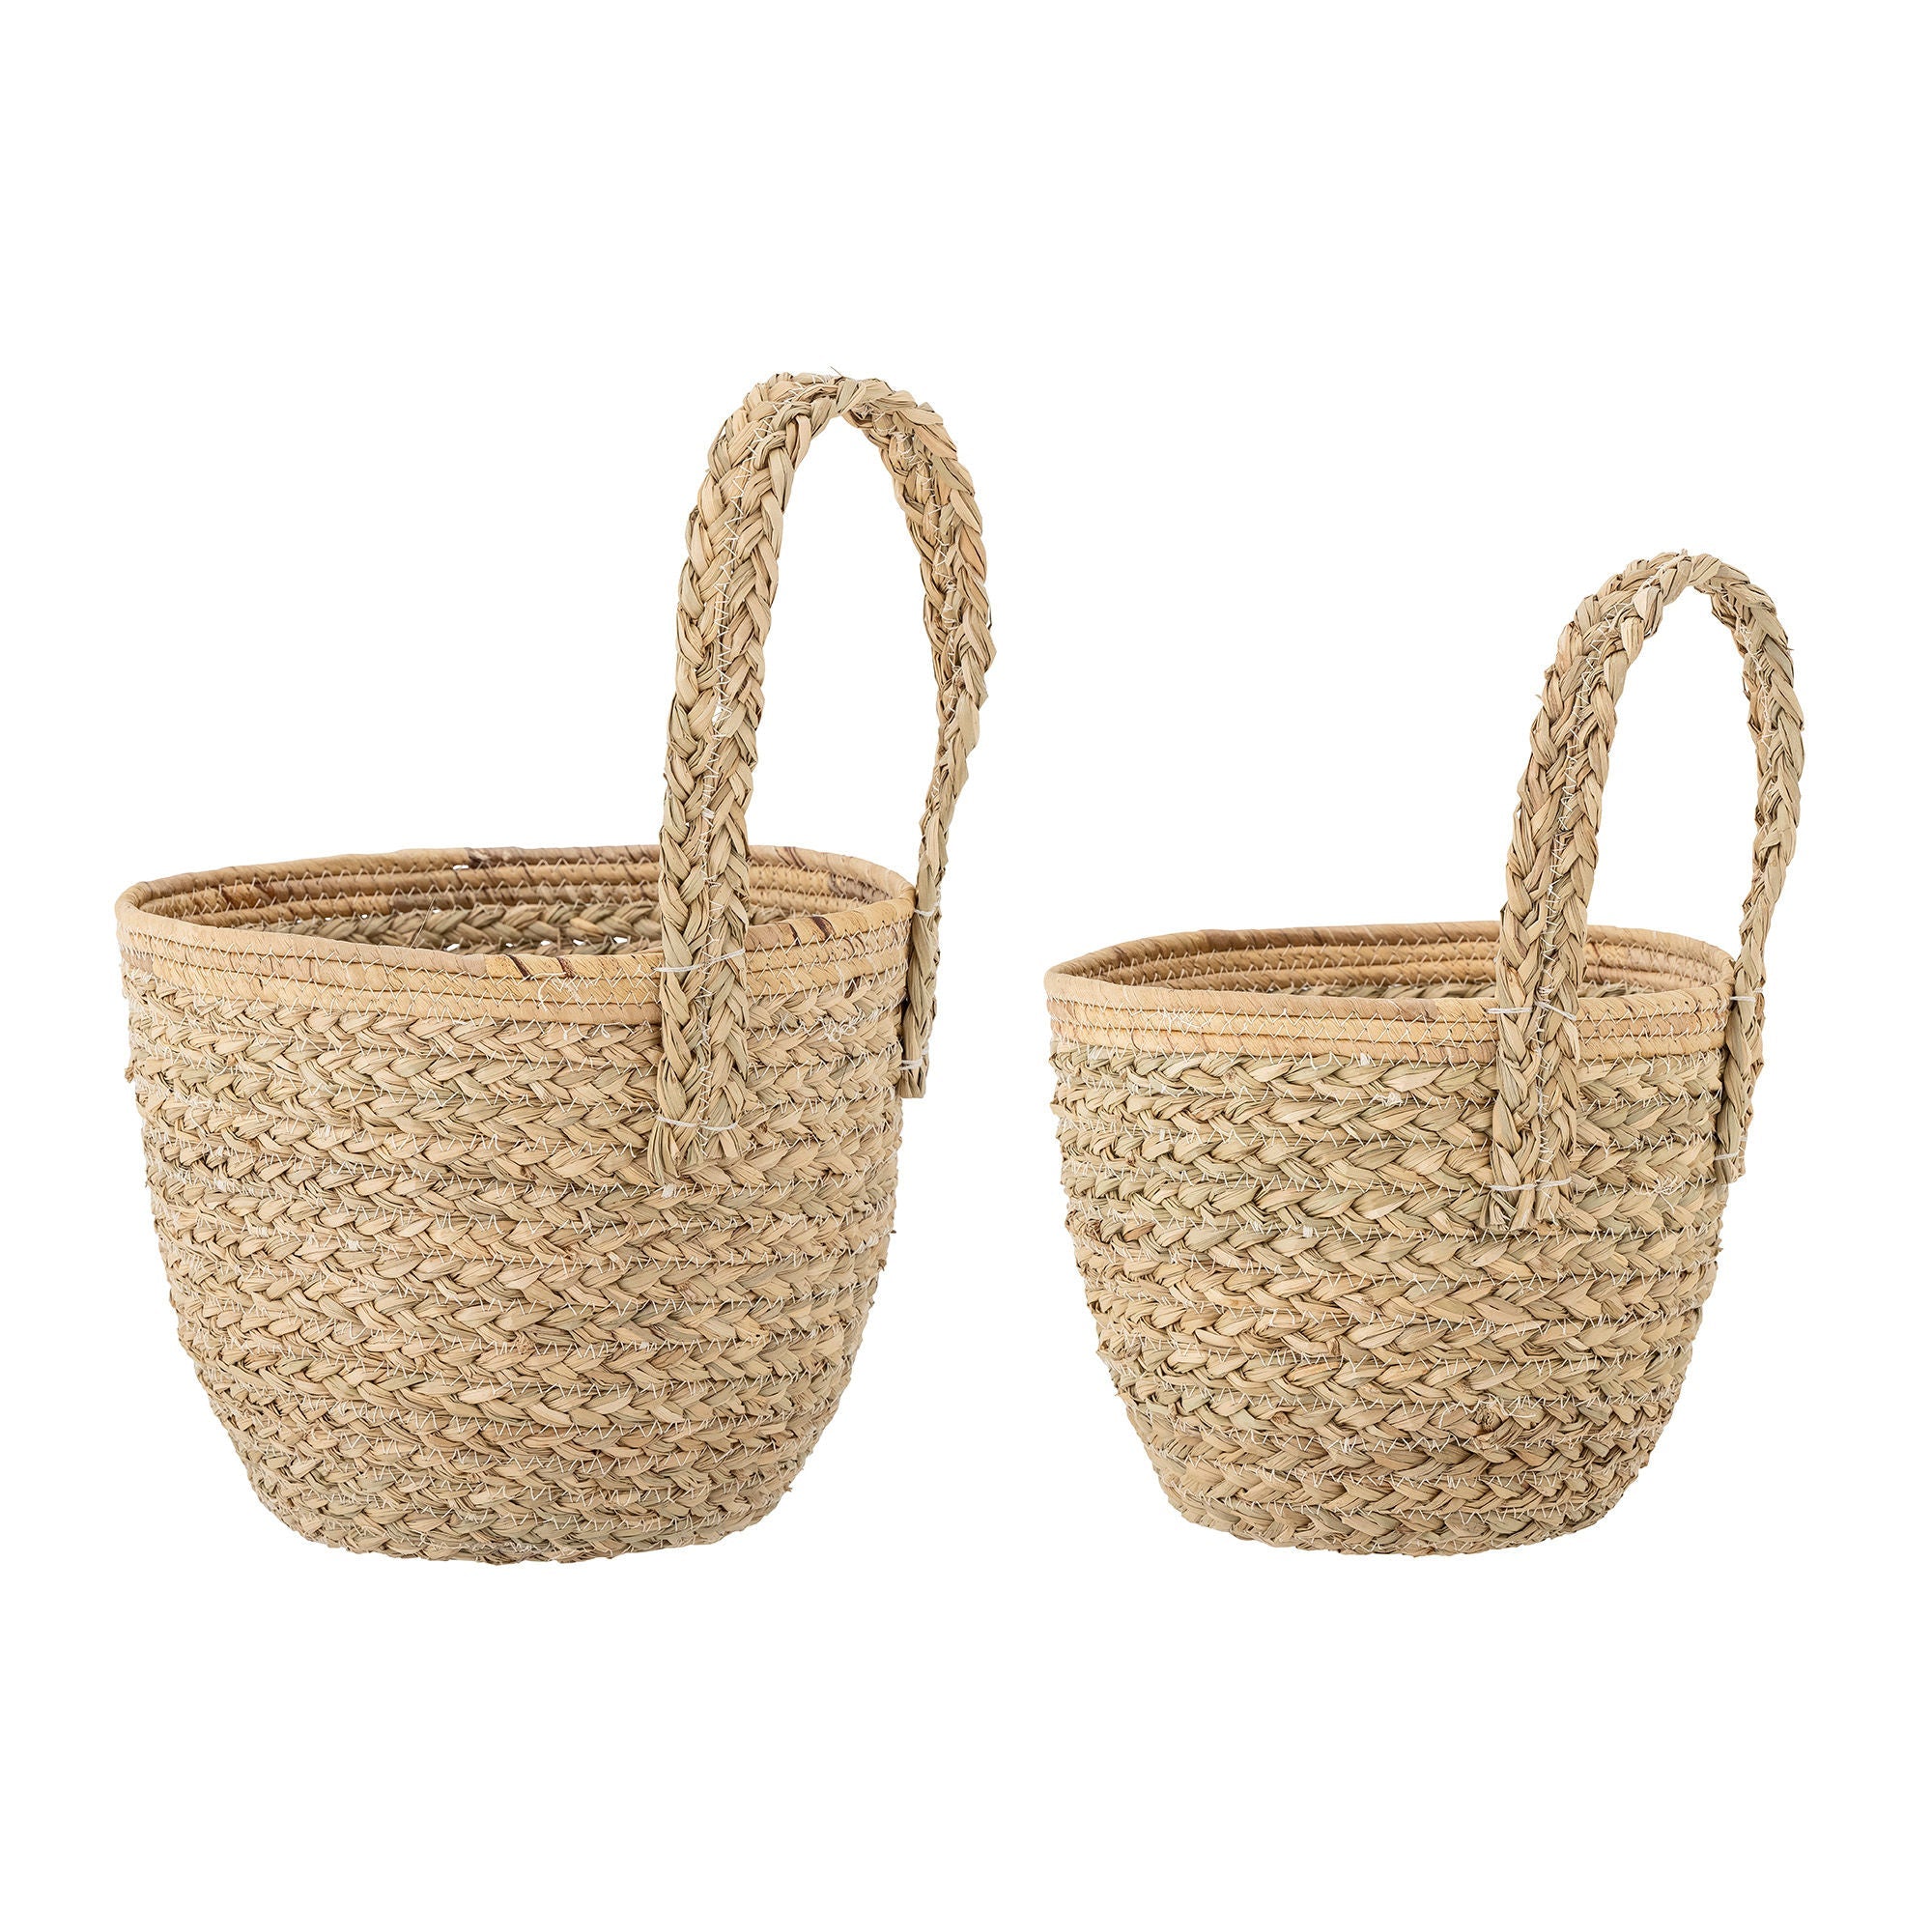 Bloomingville Amia Wall Basket, Natur, Seagrass